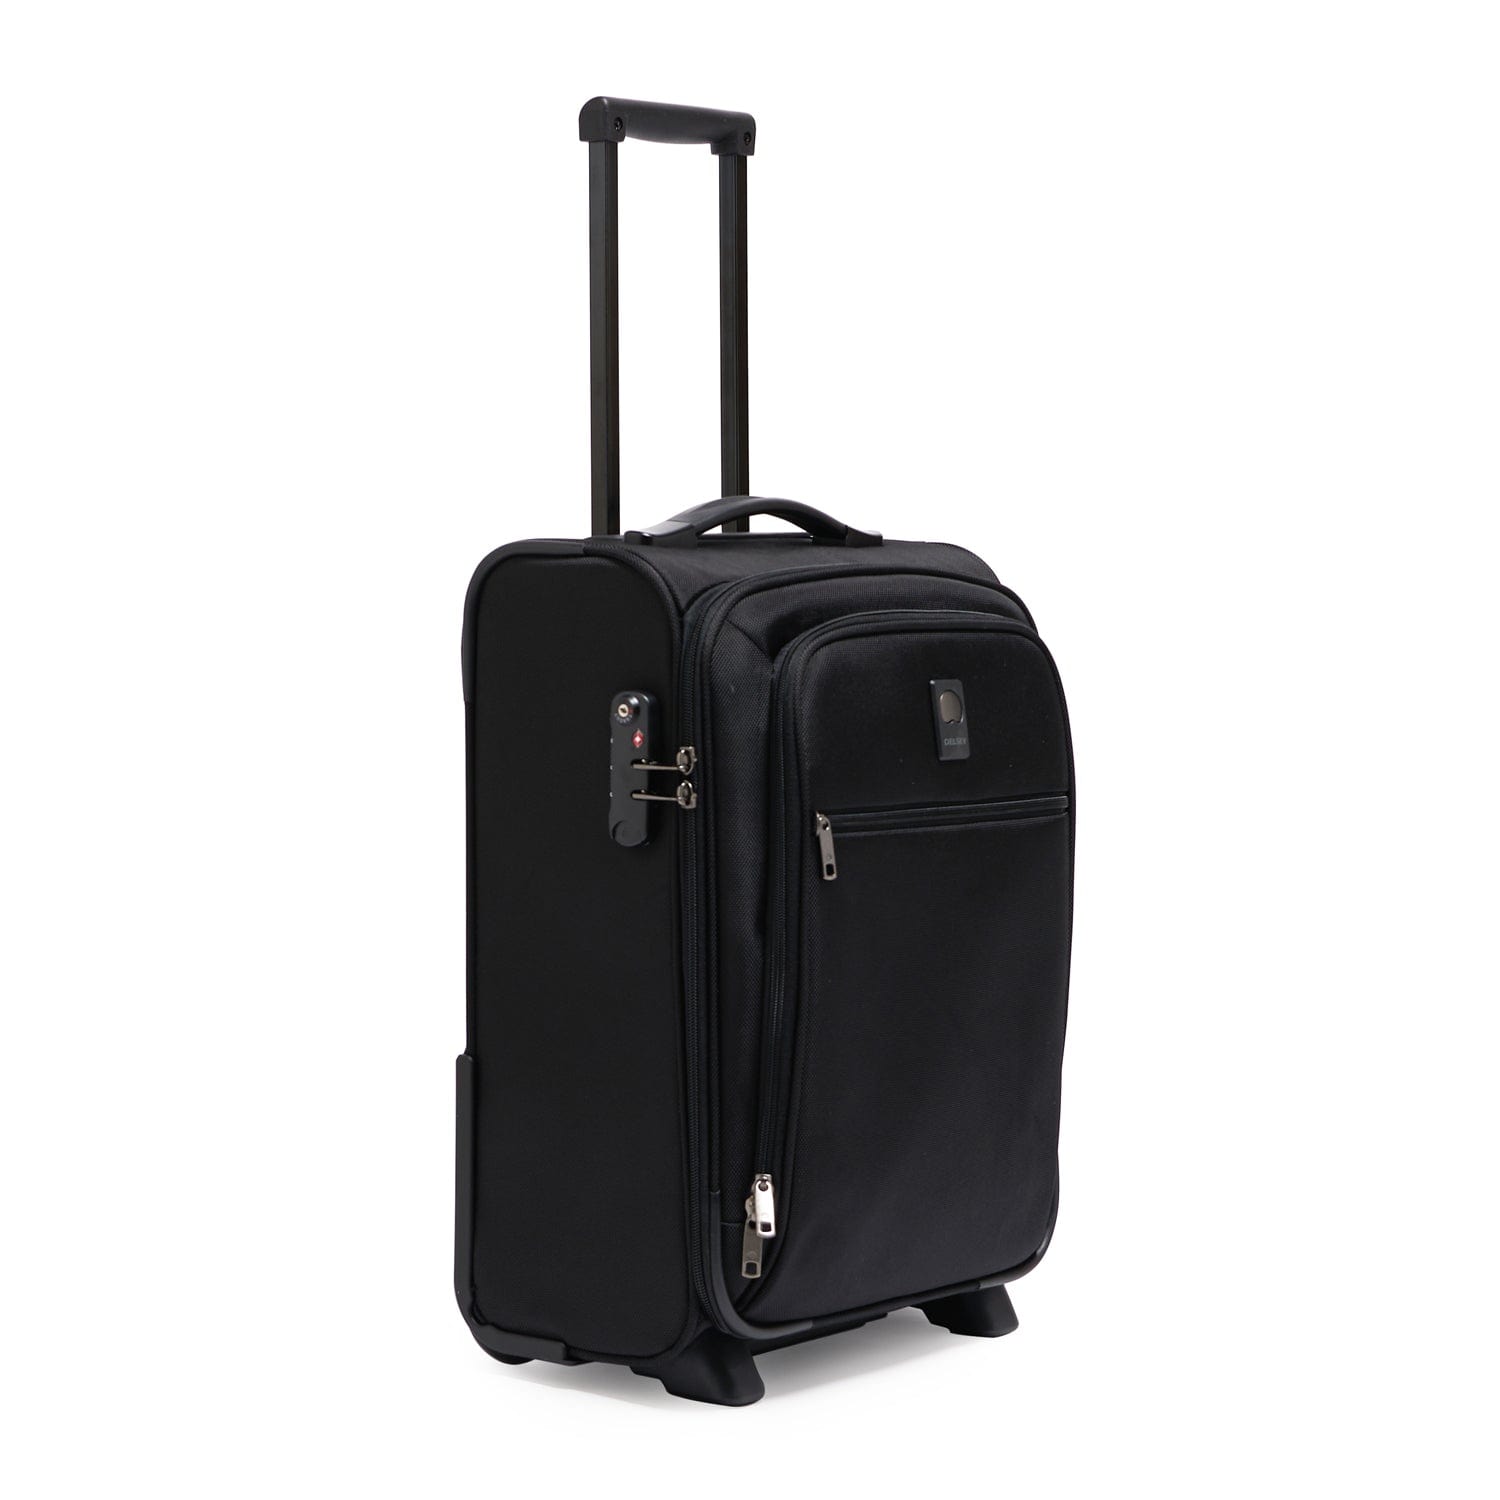 Delsey Omega 45cm Softcase 2 Wheel Cabin Luggage Trolley - 003439705-00 L9